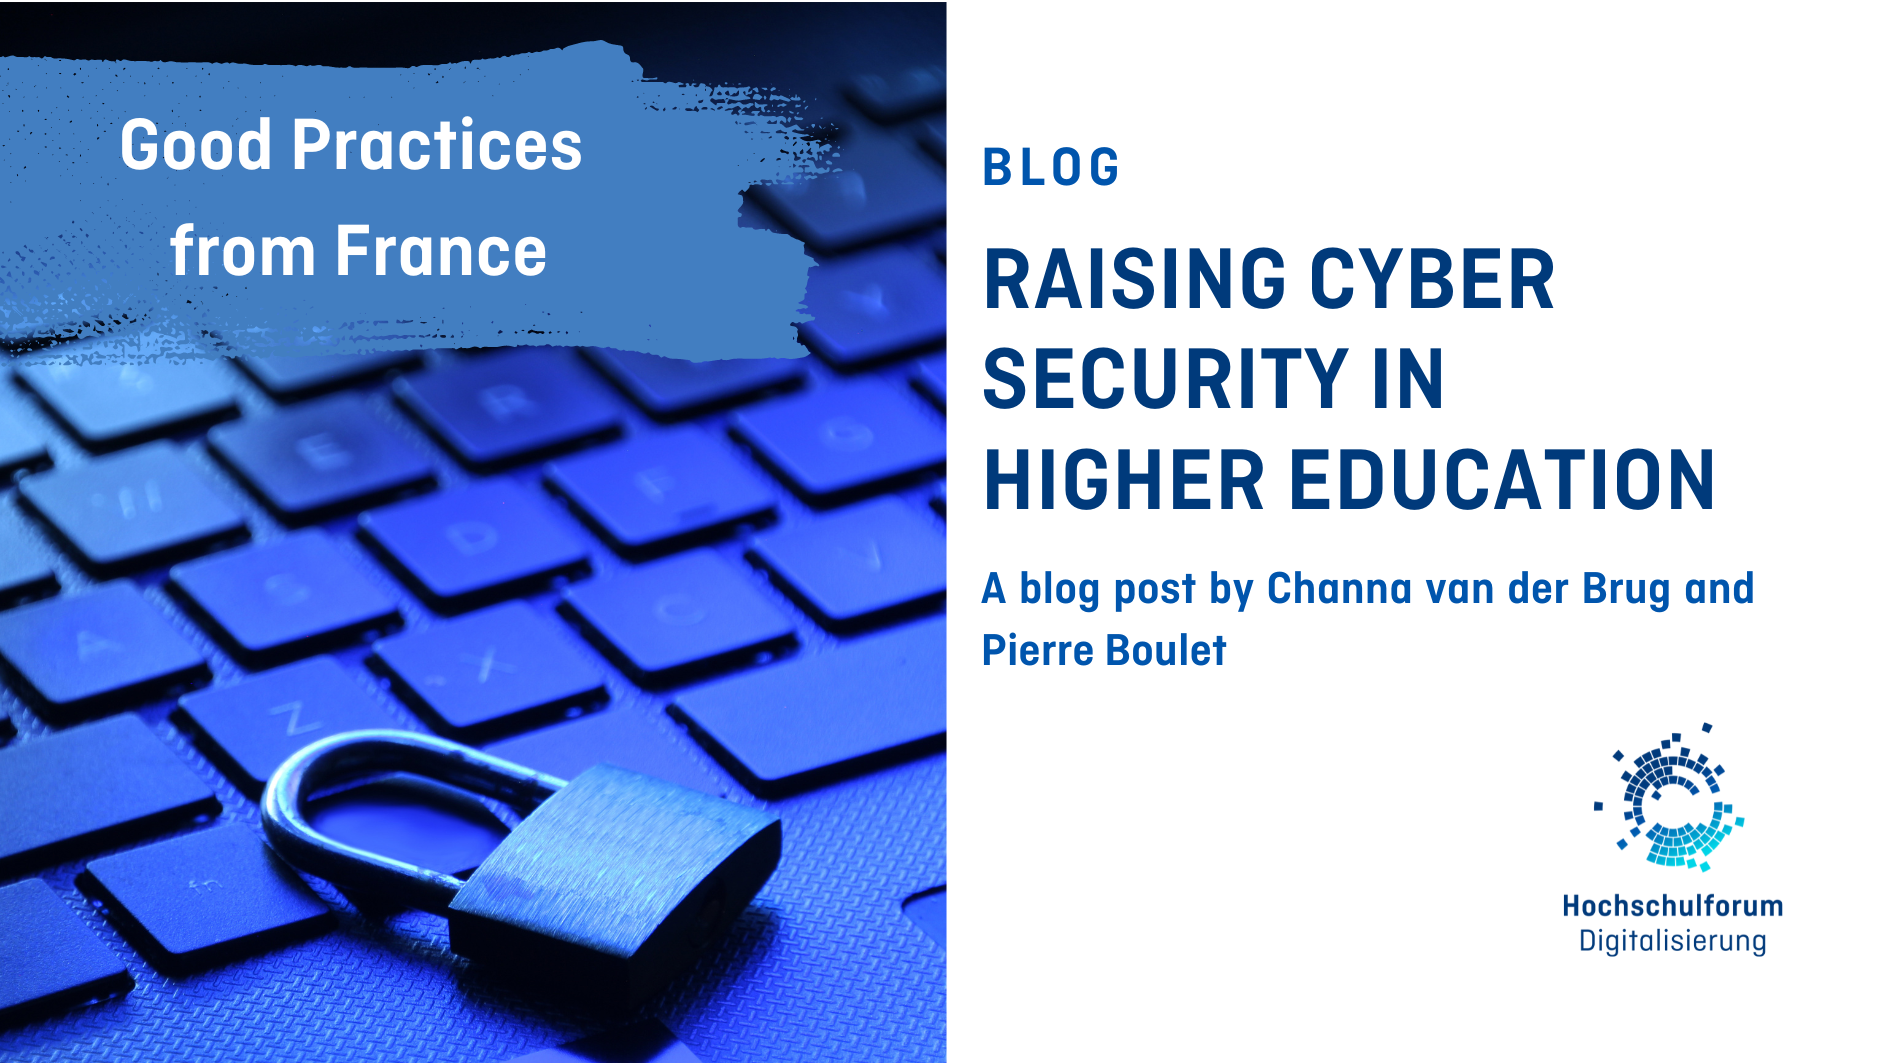 Cover image of blog entry "RAISING CYBER SECURITY IN HIGHER EDUCATION." Subtitle: "A blog post by Channa van der Brug and Pierre Boulet. Good Practices from France. Image at right shows a lock on a keyboard. Logo on bottom right: Hochschulforum Digitalisierung.